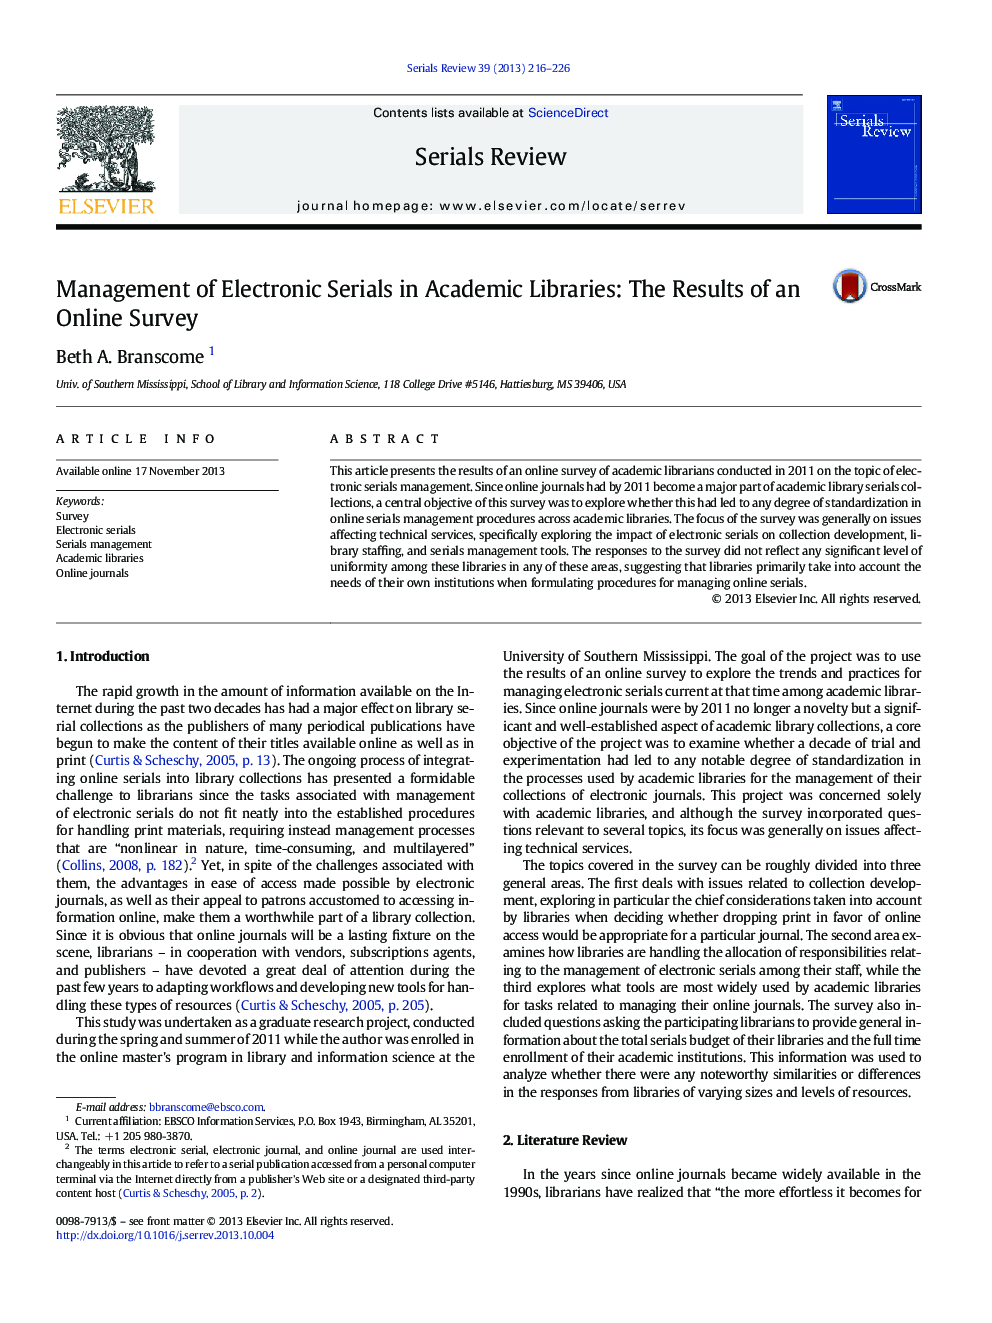 Management of Electronic Serials in Academic Libraries: The Results of an Online Survey